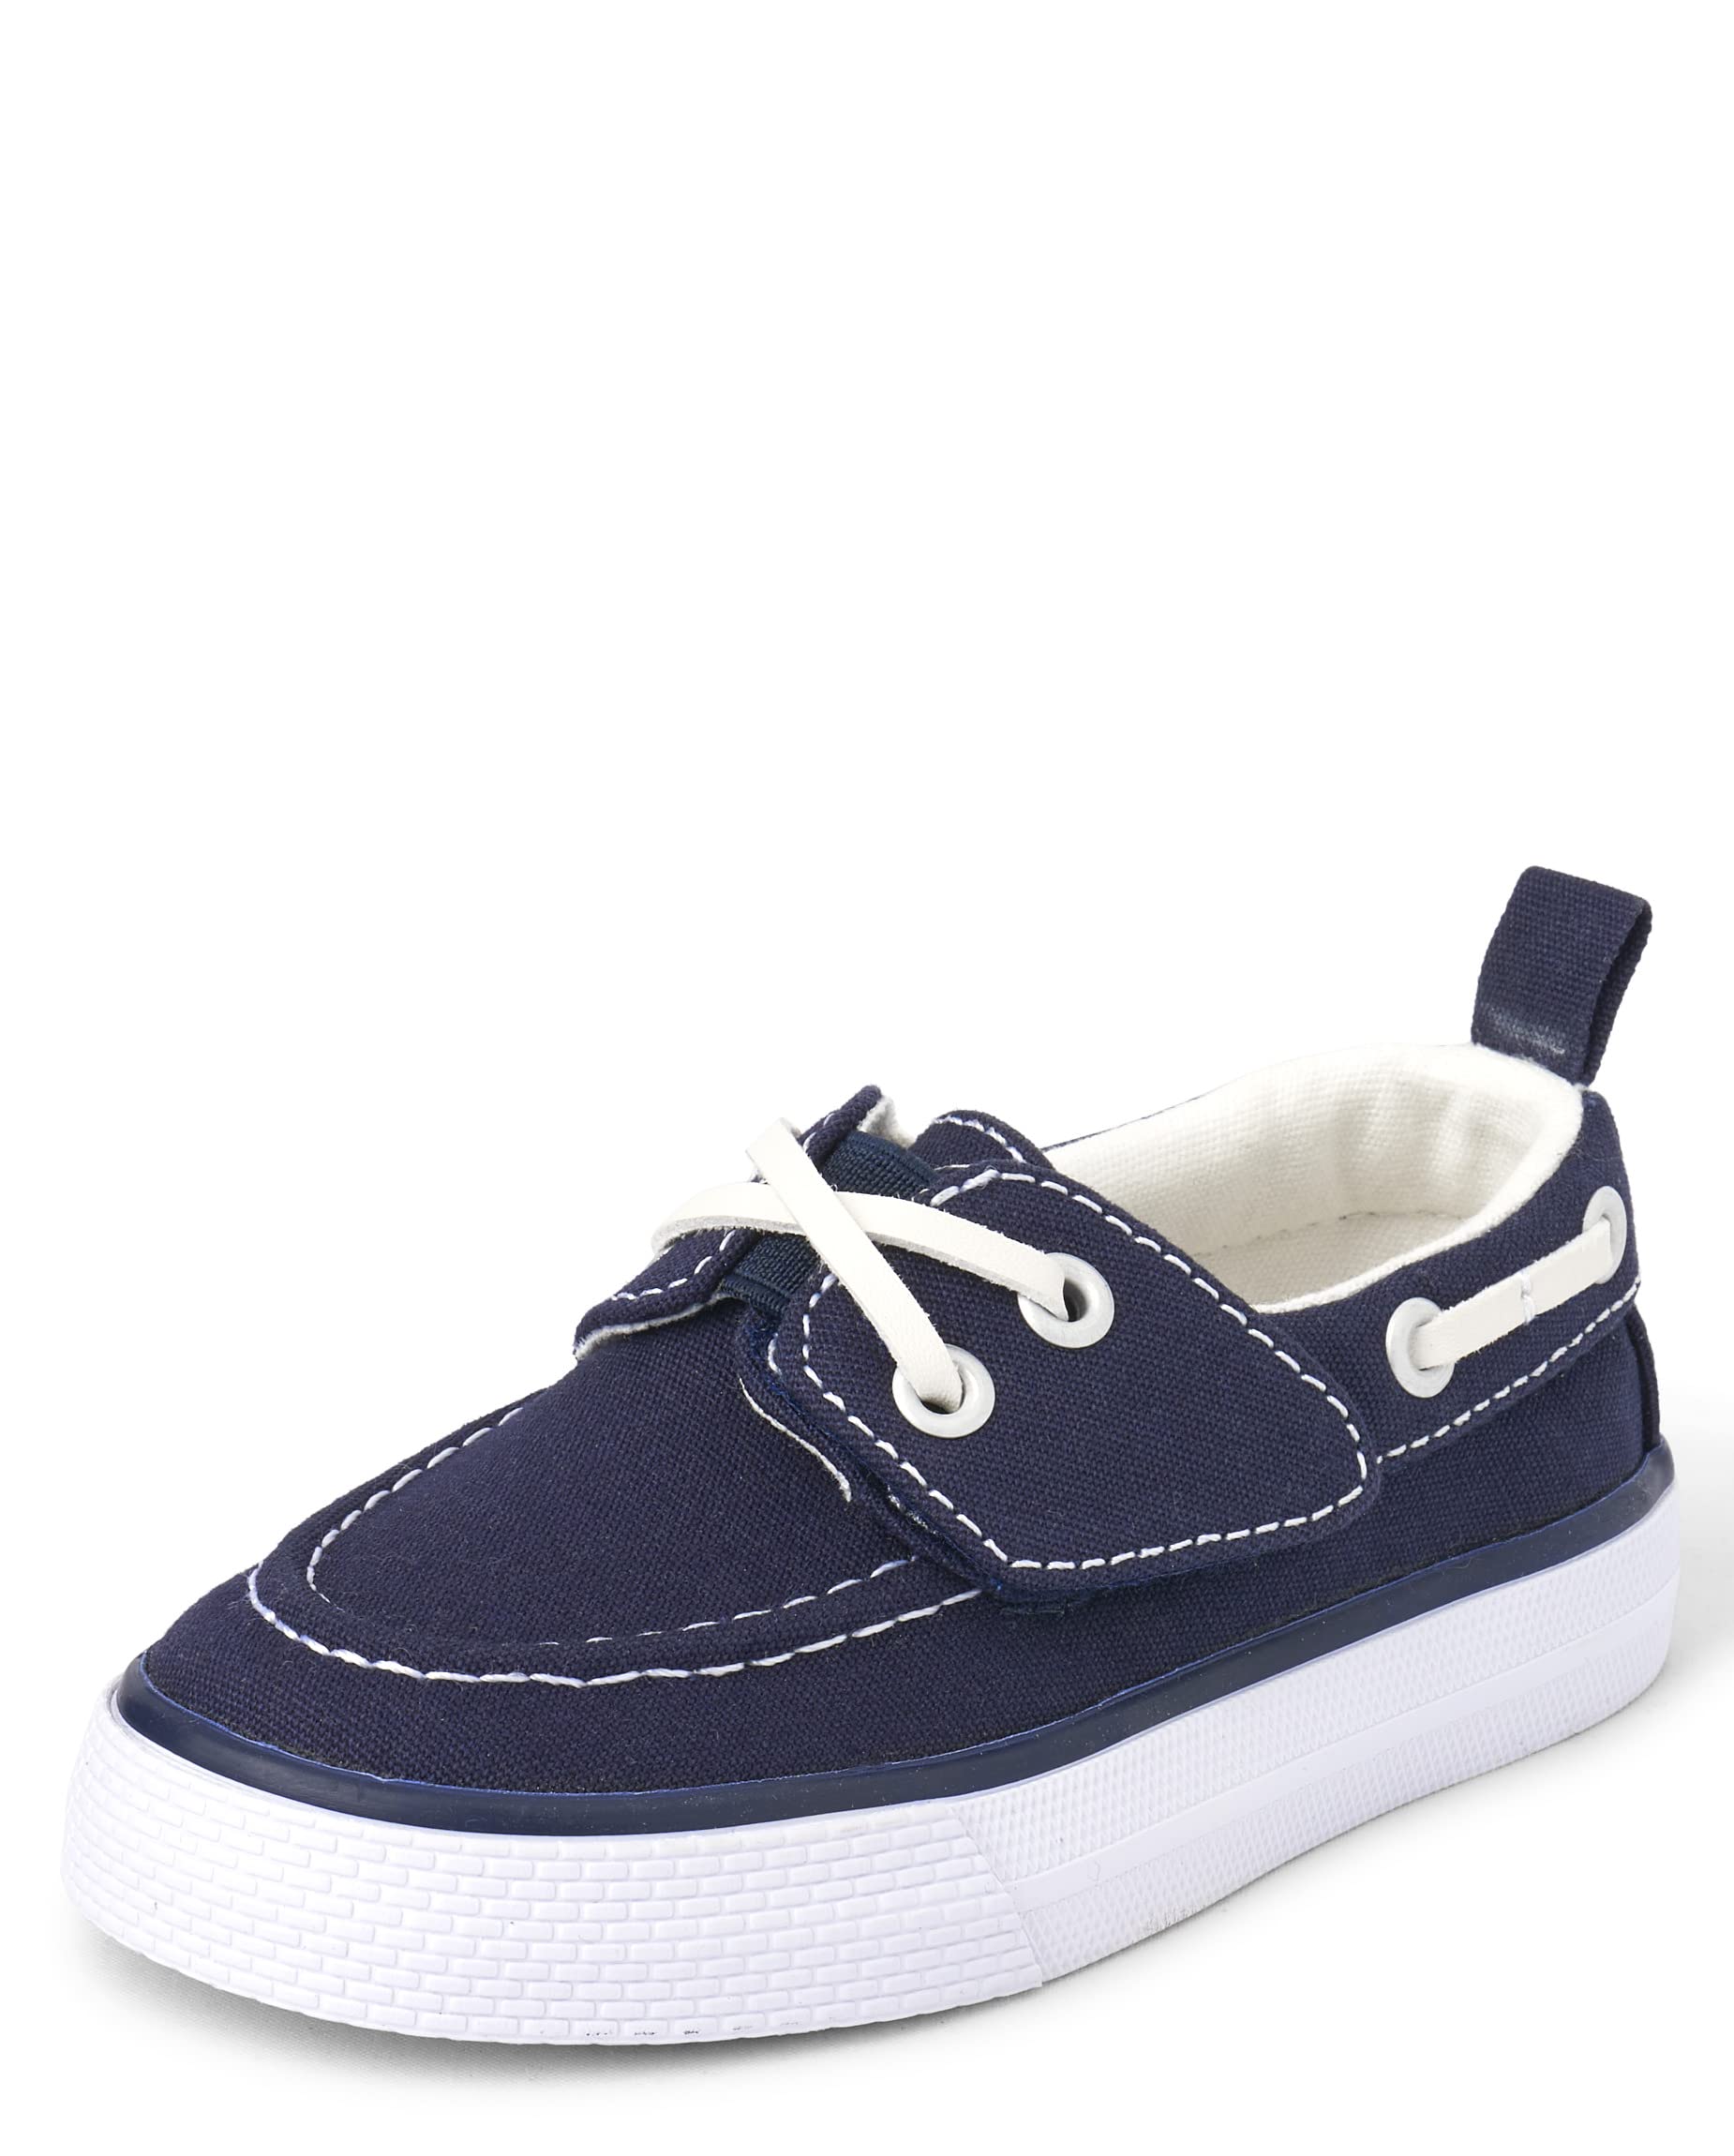 Gymboree Boy's and Toddler Boat Shoes